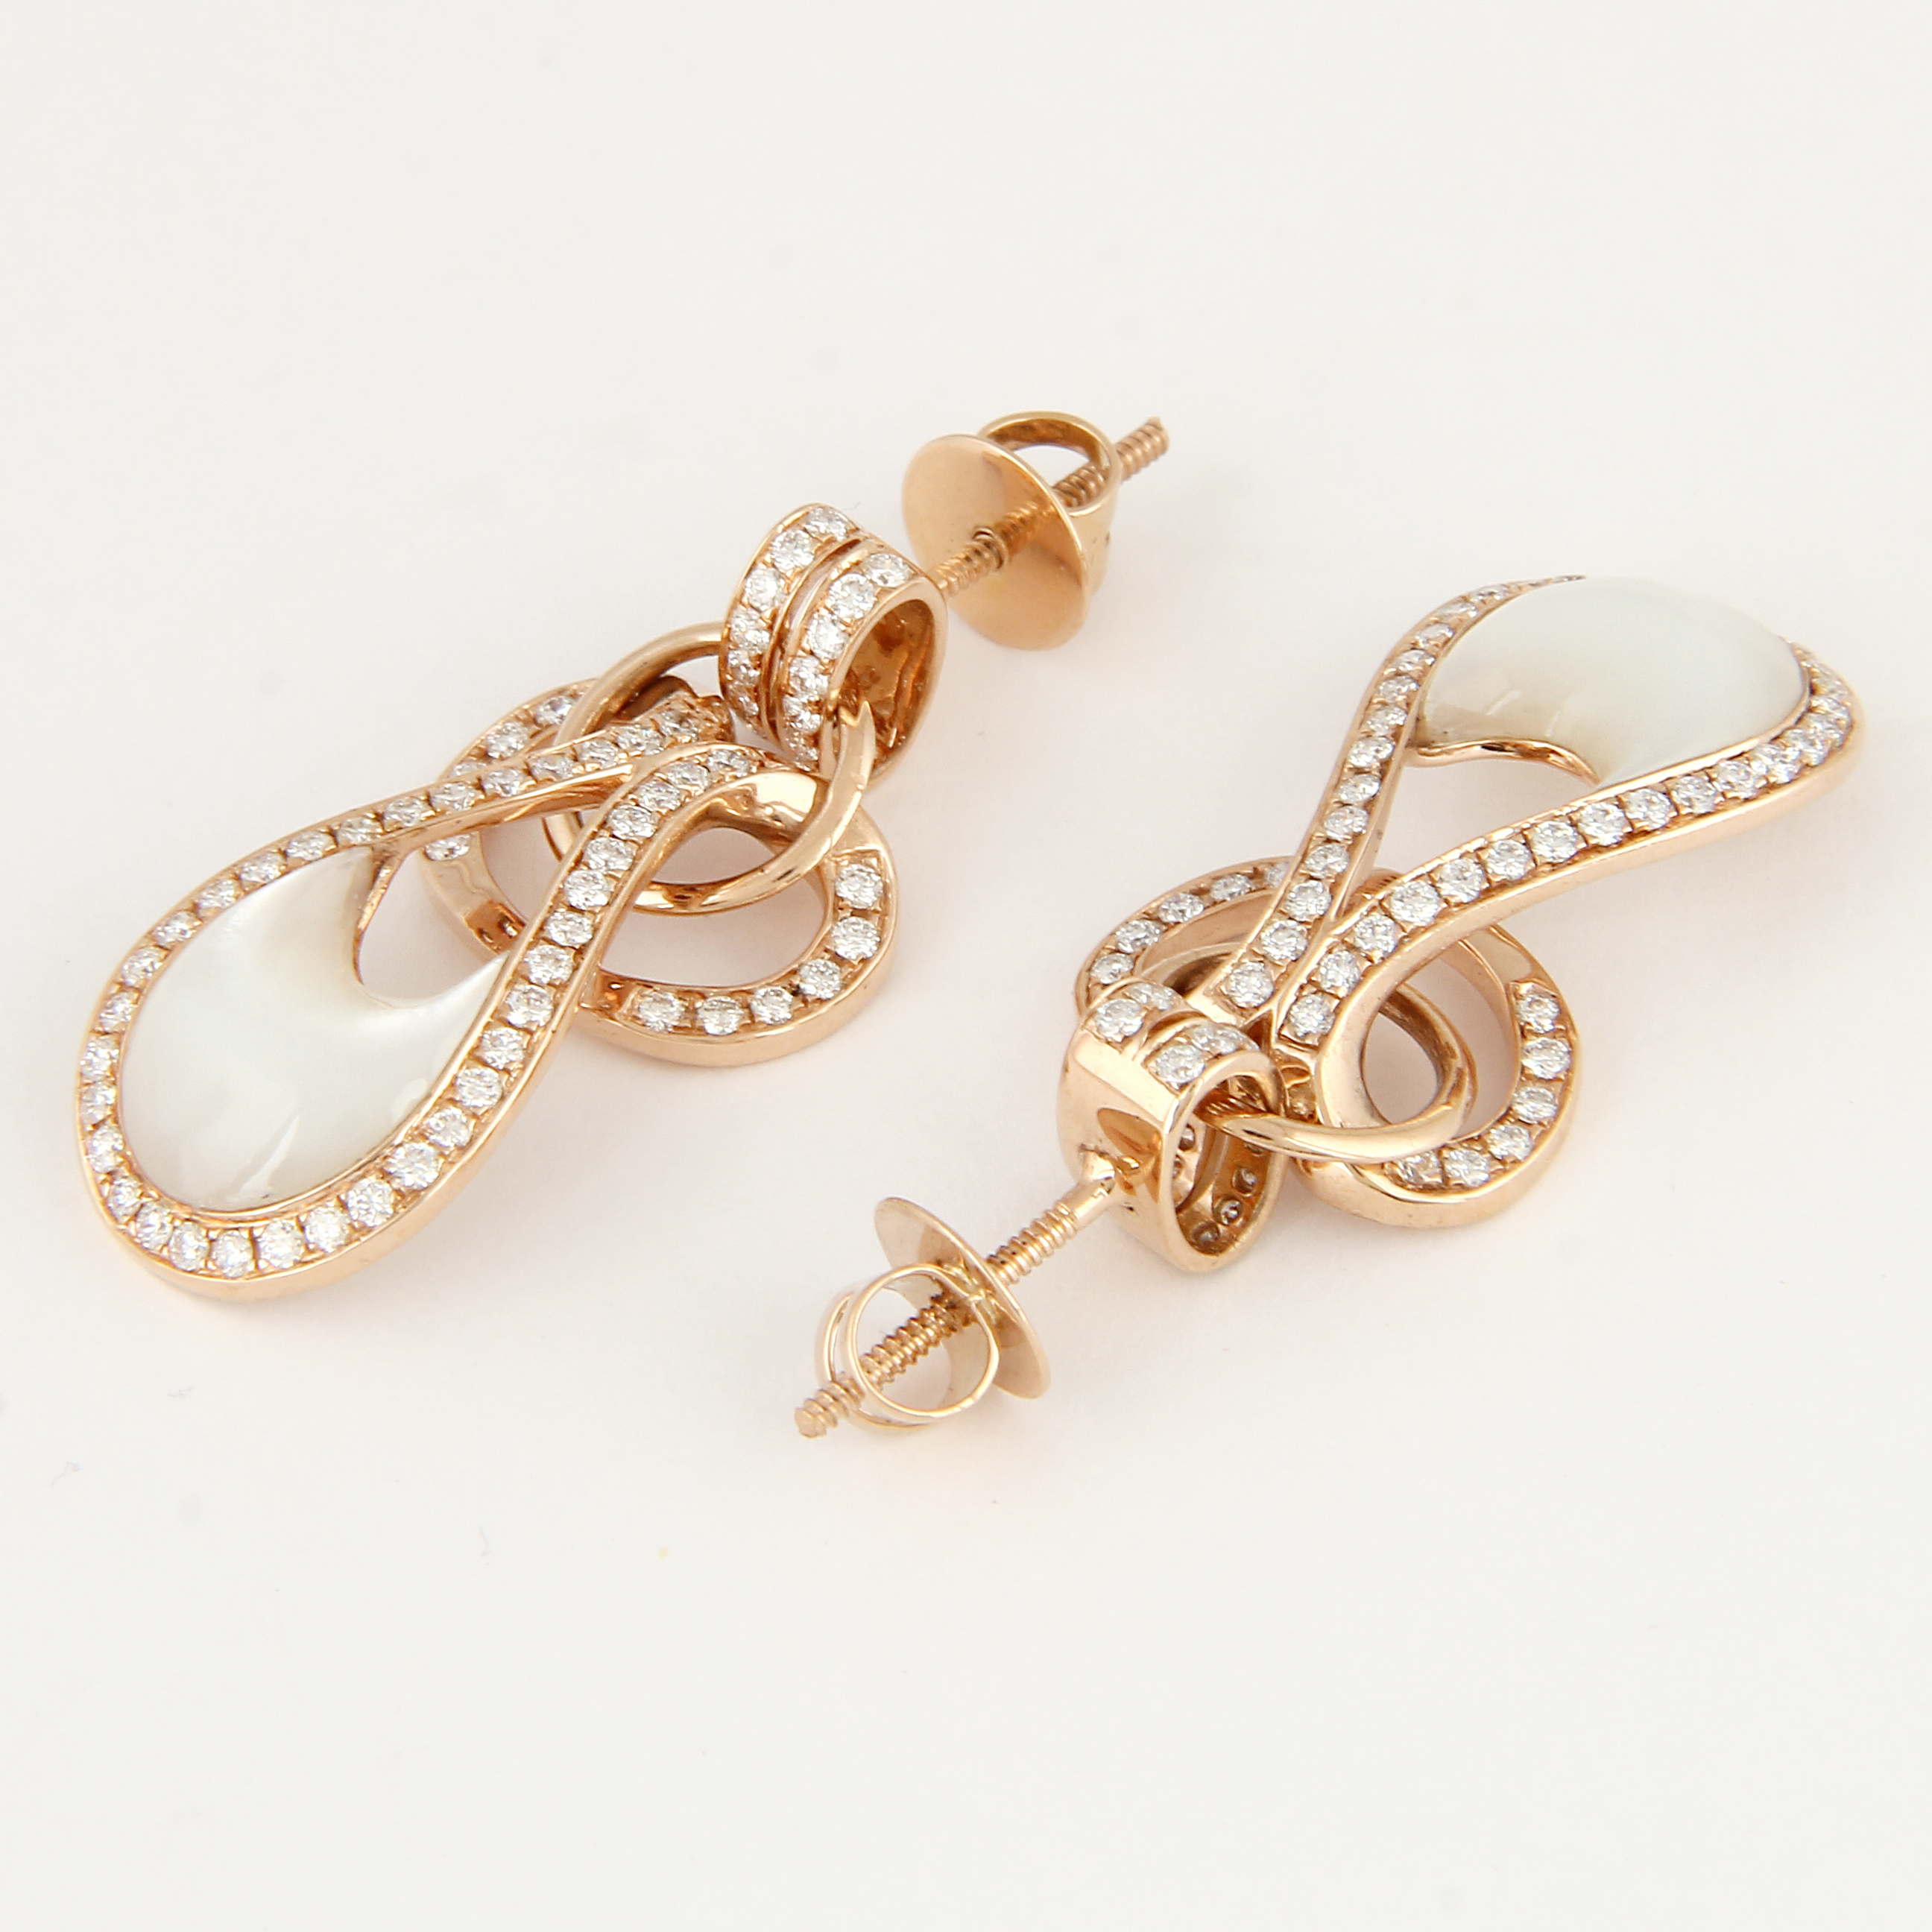 14 K Rose Gold Diamond & Mother of Pearl Earrings - Image 2 of 3